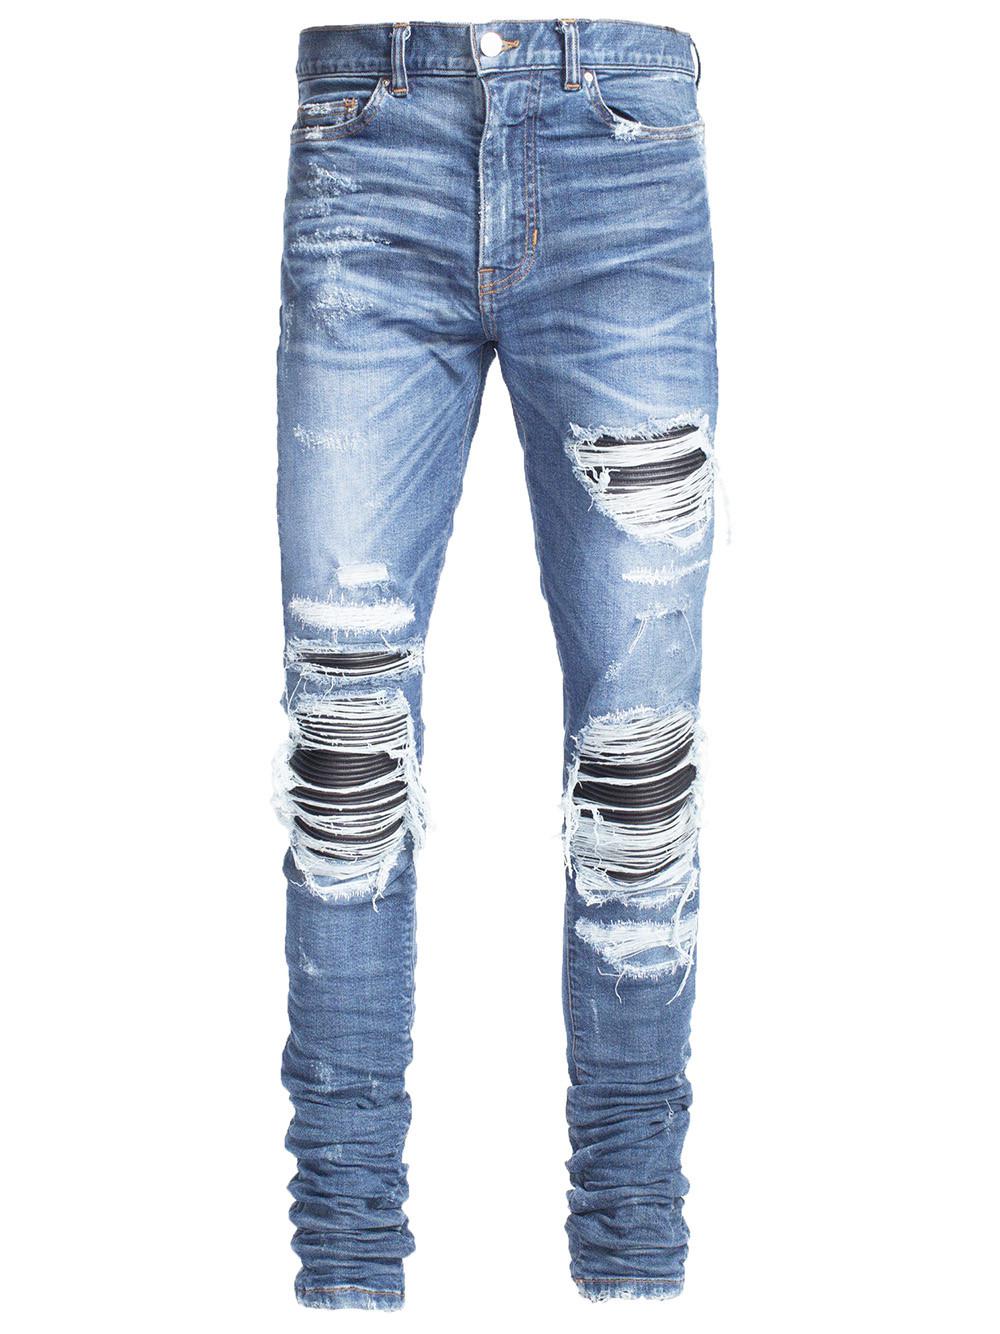 Lyst - Amiri Mx1 Leather Patch Jeans in Blue for Men